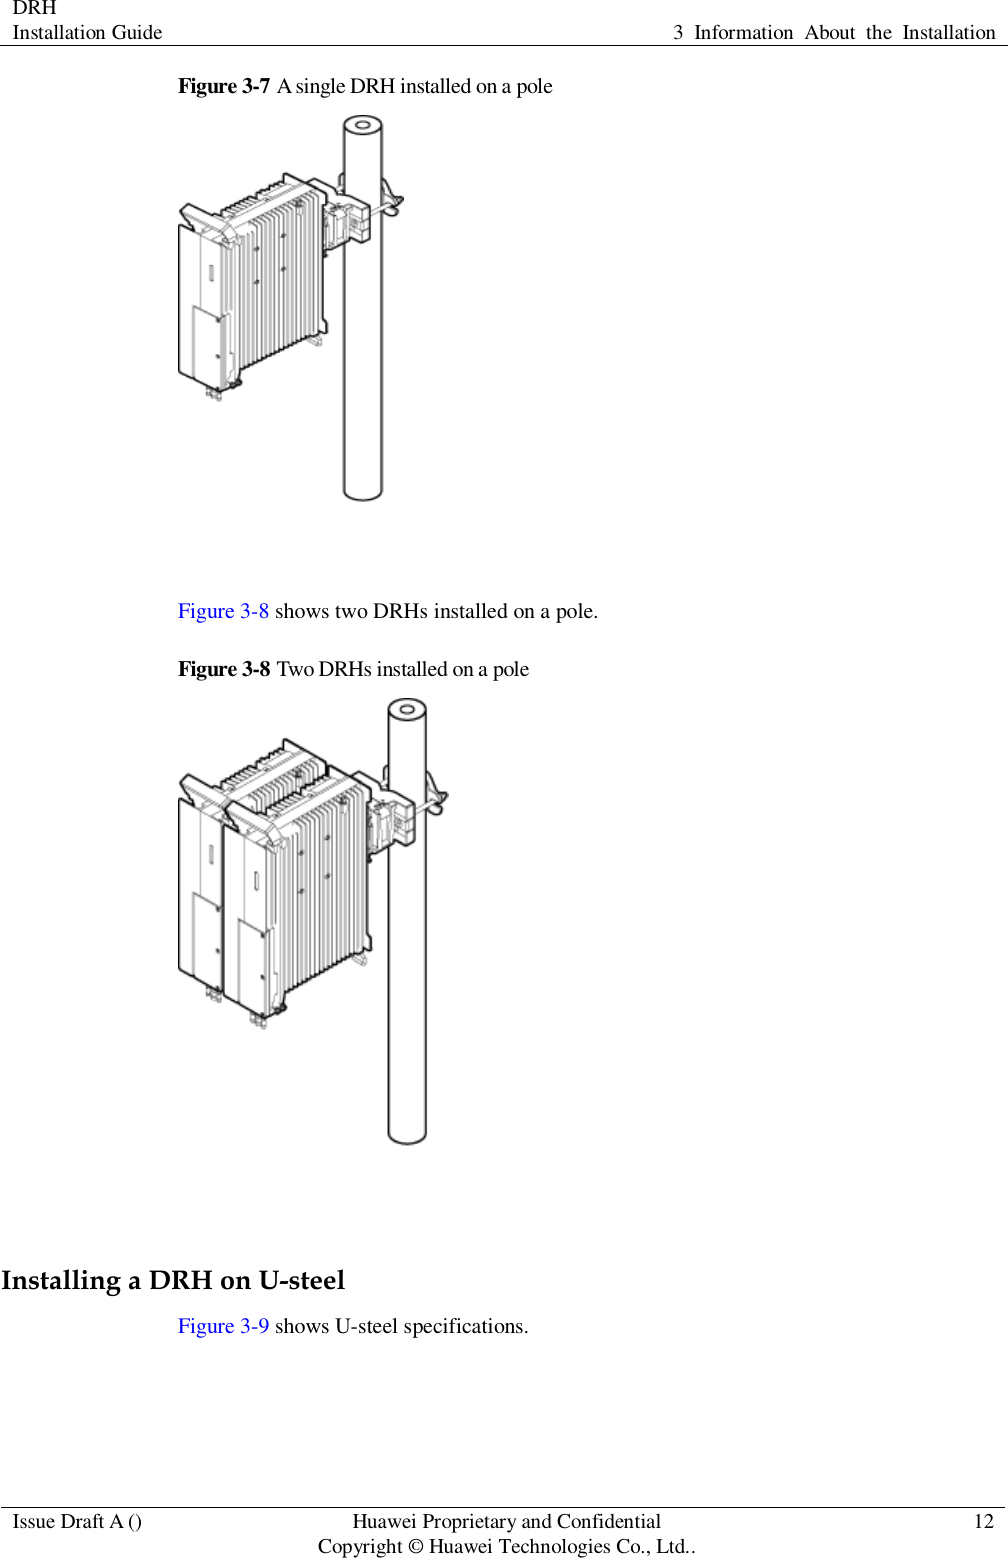 DRH   Installation Guide 3  Information  About  the  Installation  Issue Draft A () Huawei Proprietary and Confidential                                     Copyright © Huawei Technologies Co., Ltd.. 12  Figure 3-7 A single DRH installed on a pole   Figure 3-8 shows two DRHs installed on a pole. Figure 3-8 Two DRHs installed on a pole   Installing a DRH on U-steel Figure 3-9 shows U-steel specifications. 